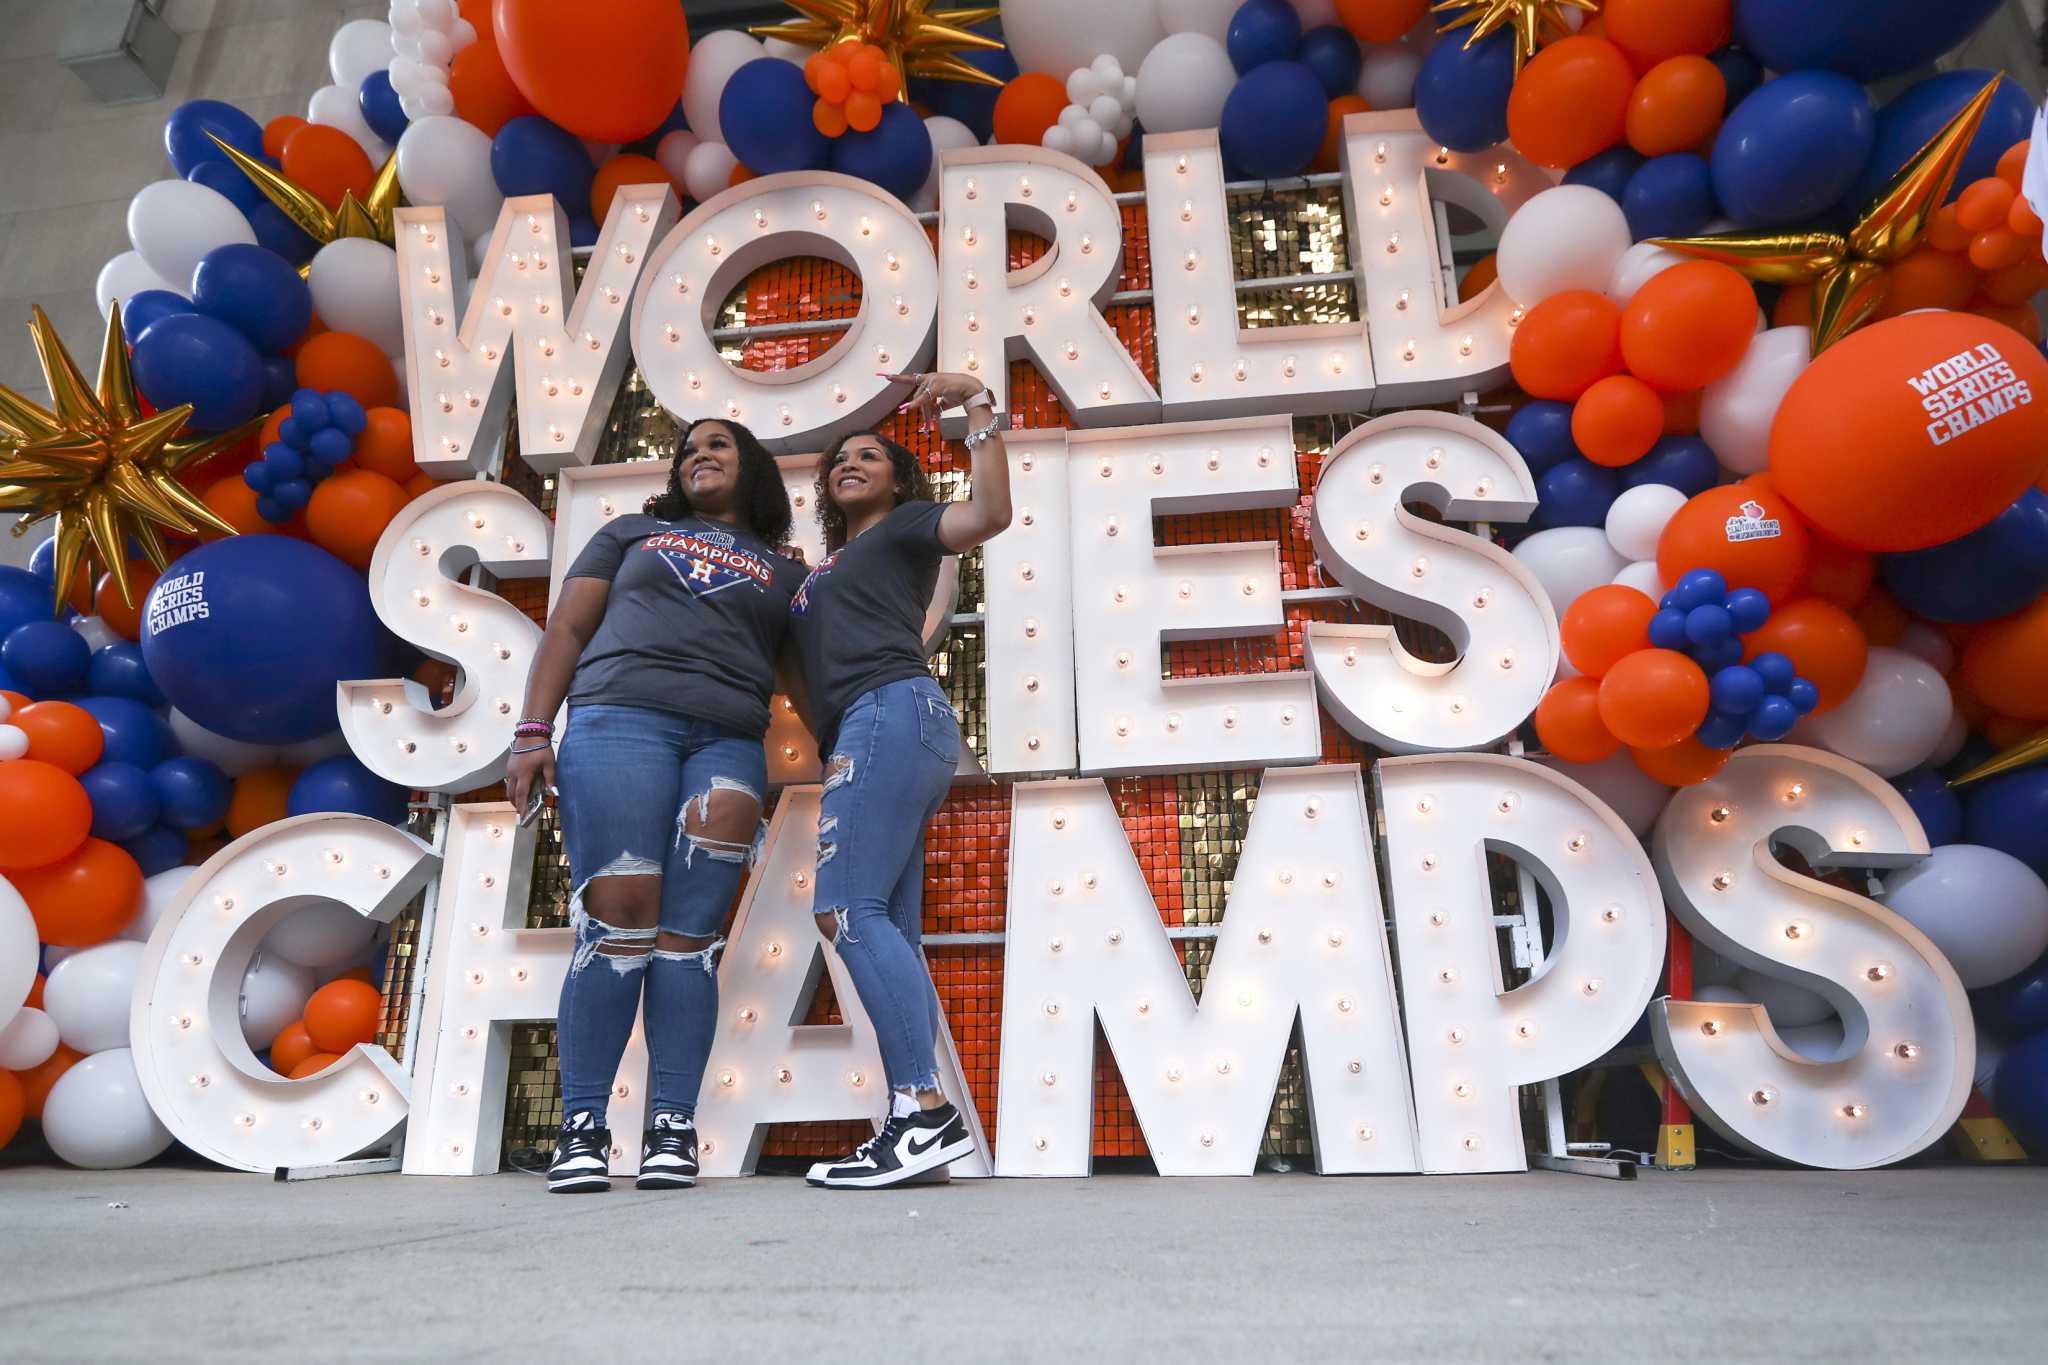 Houston Astros World Series victory parade and rally turned